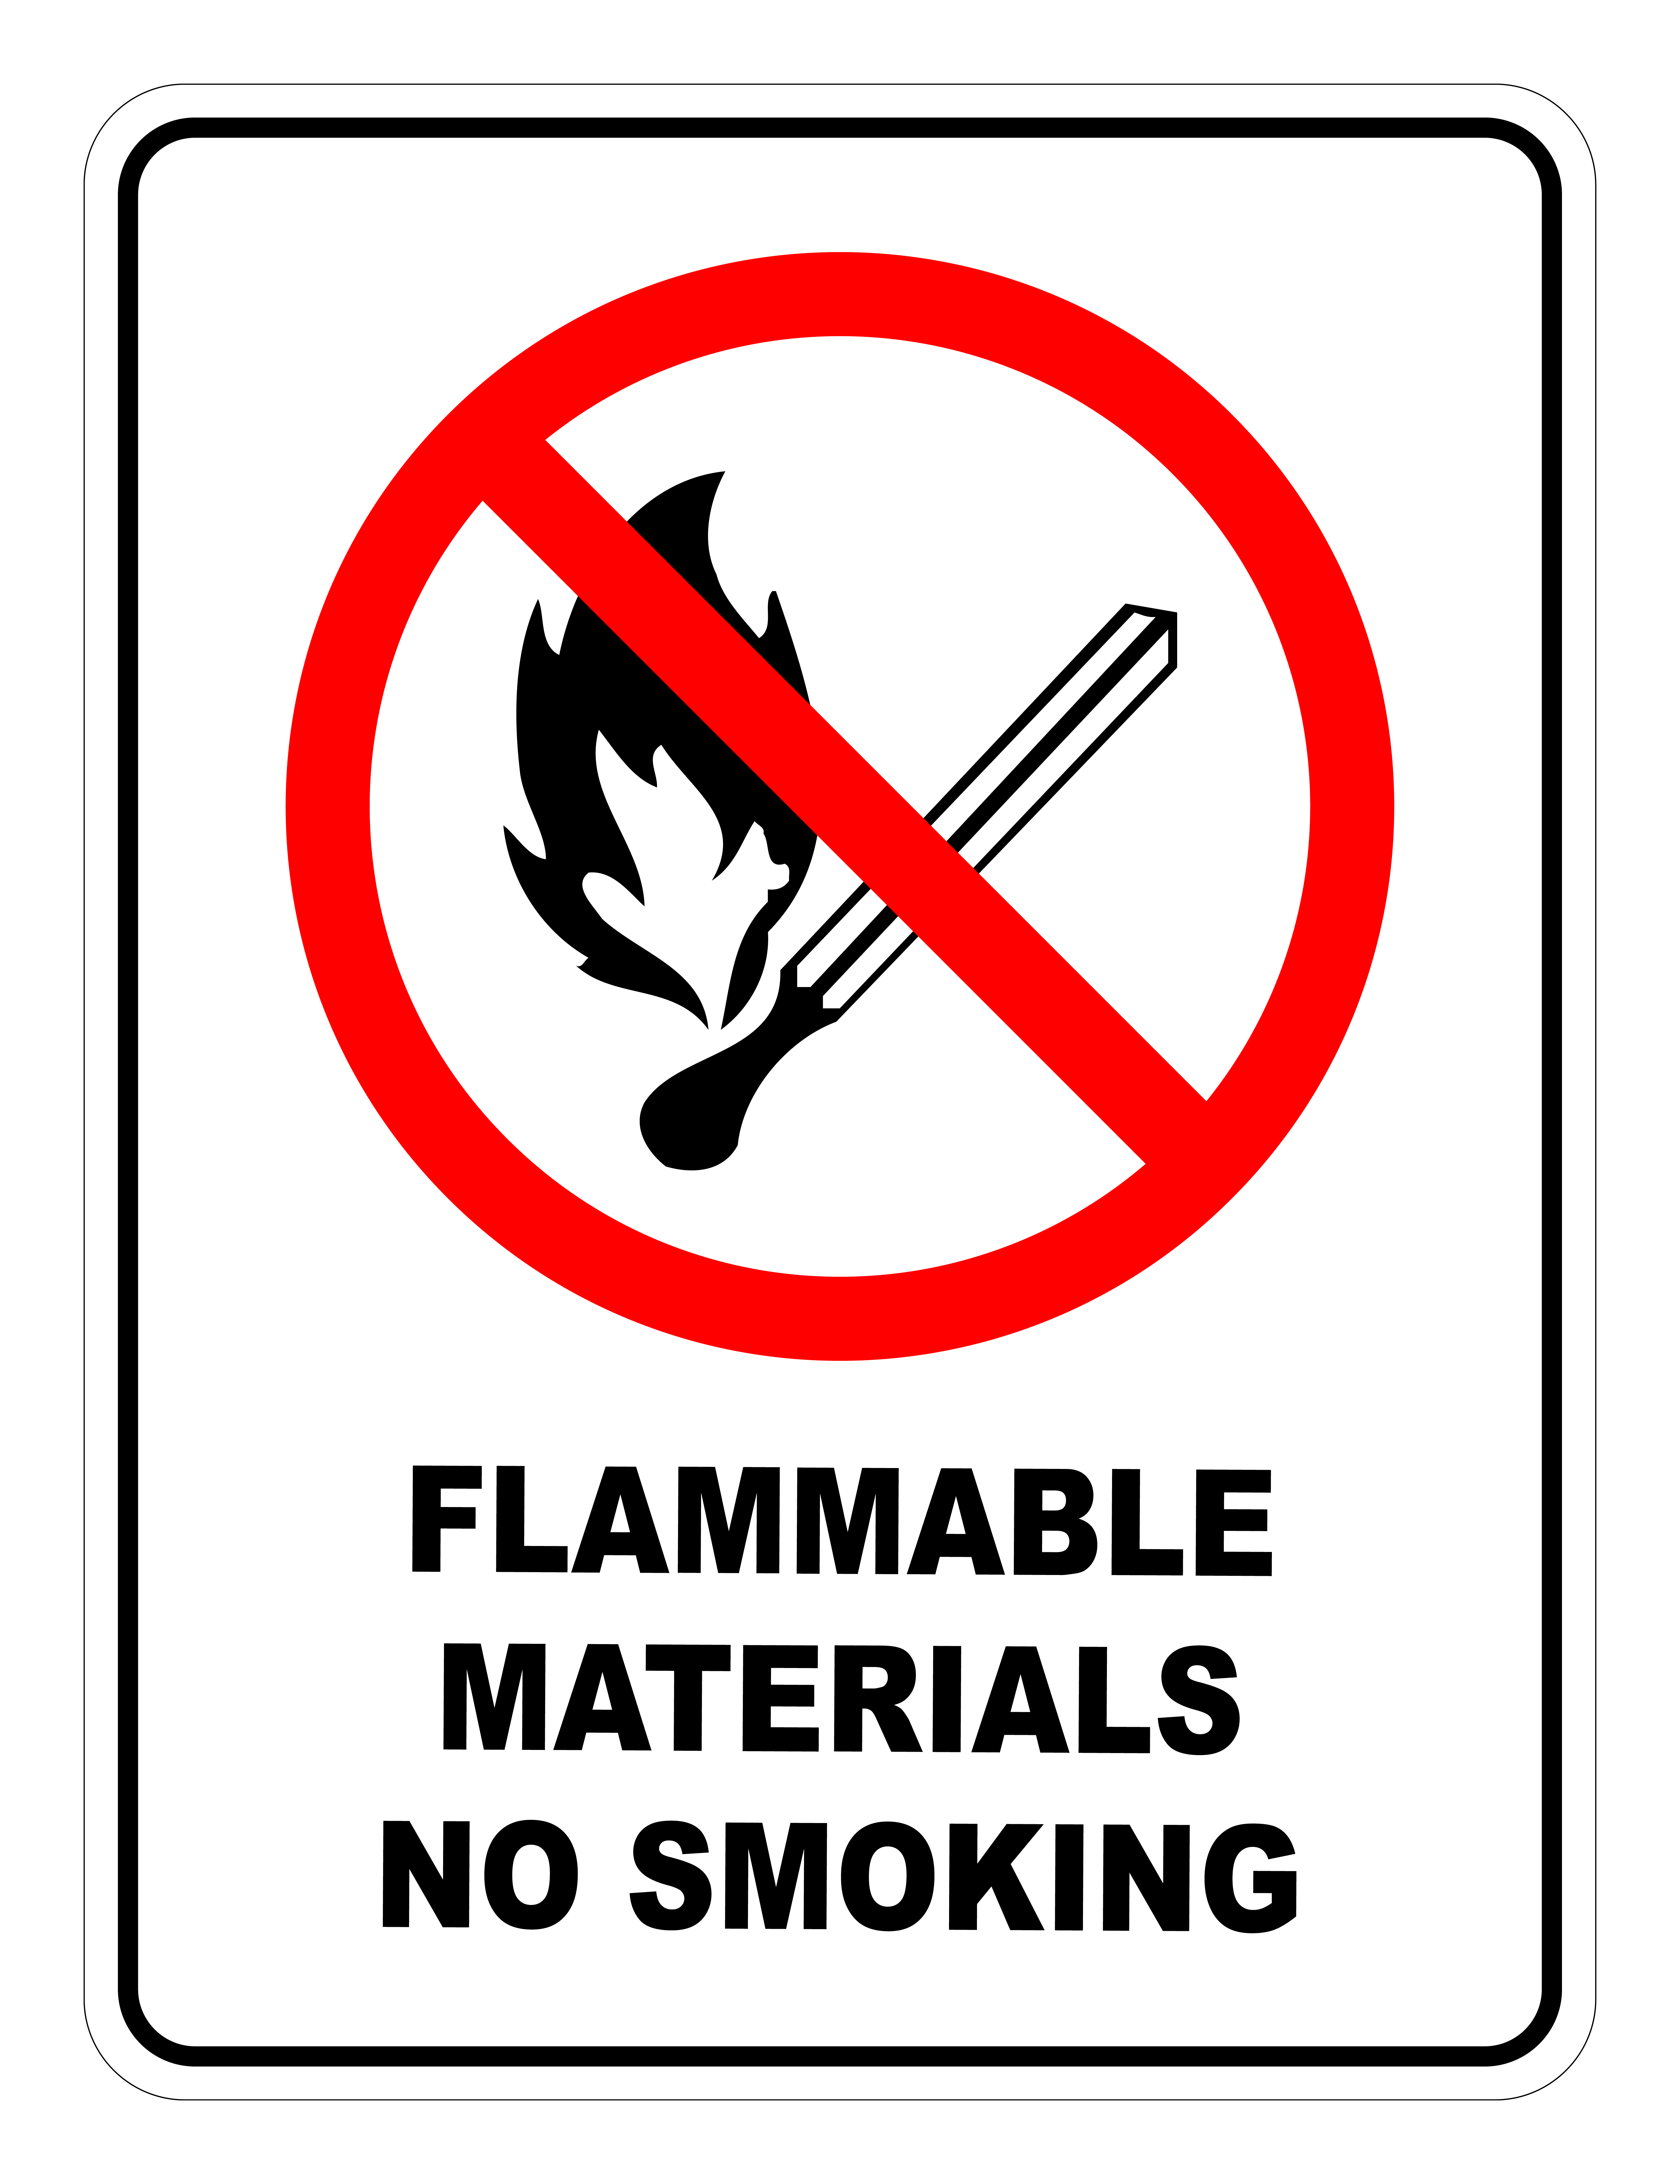 Flammable Materials No Smoking Prohibited Safety Sign Safety Signs Warehouse